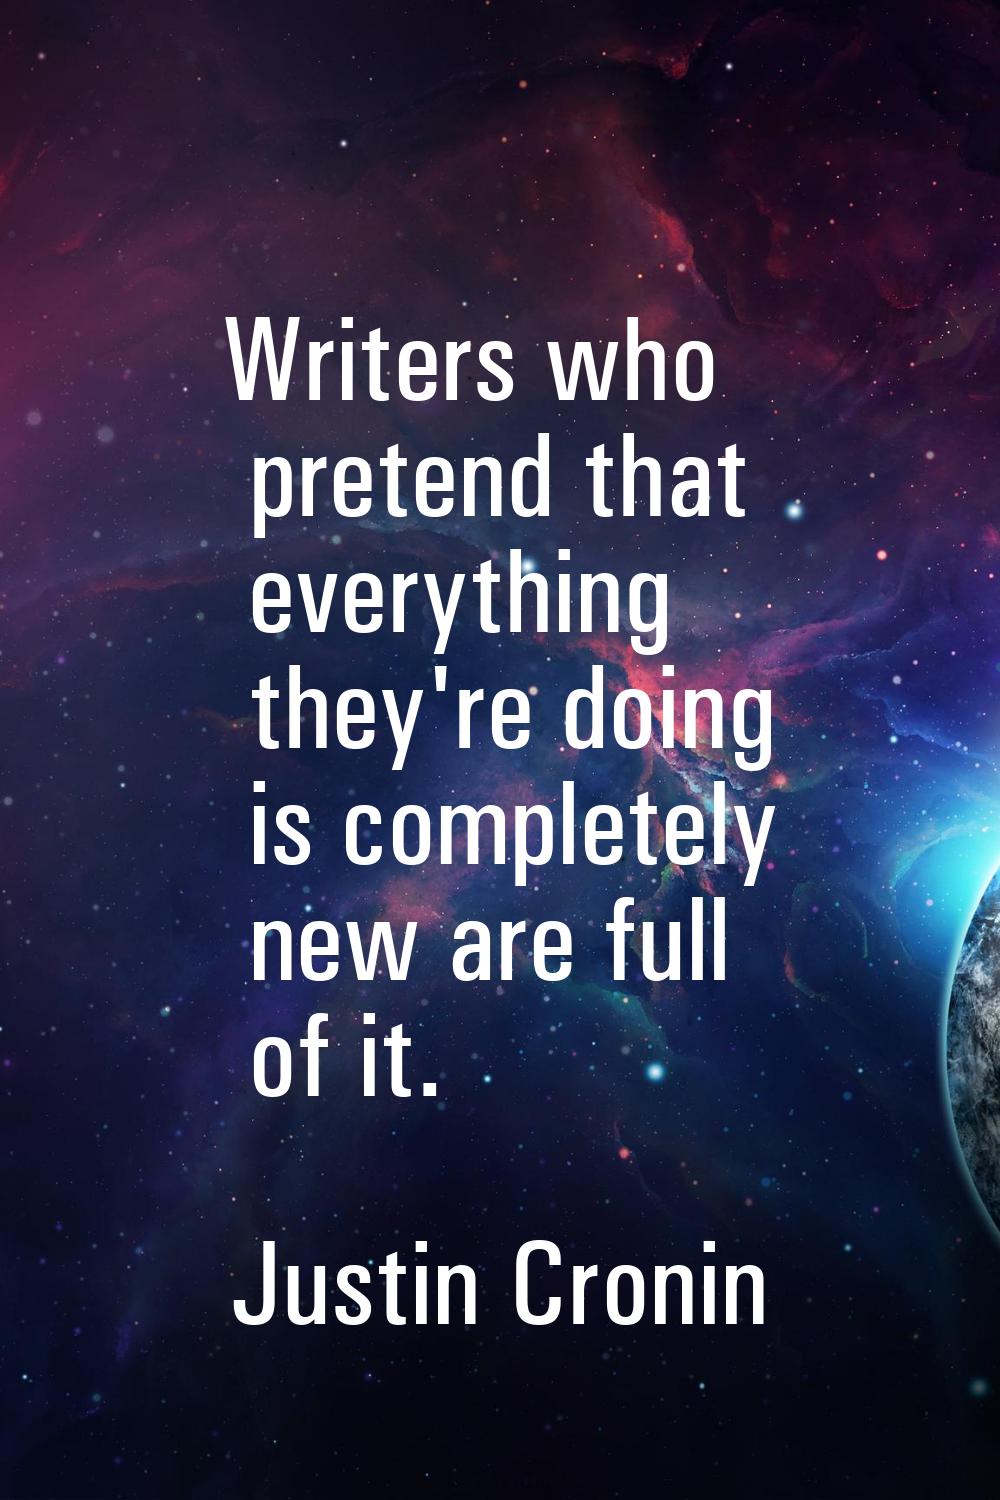 Writers who pretend that everything they're doing is completely new are full of it.